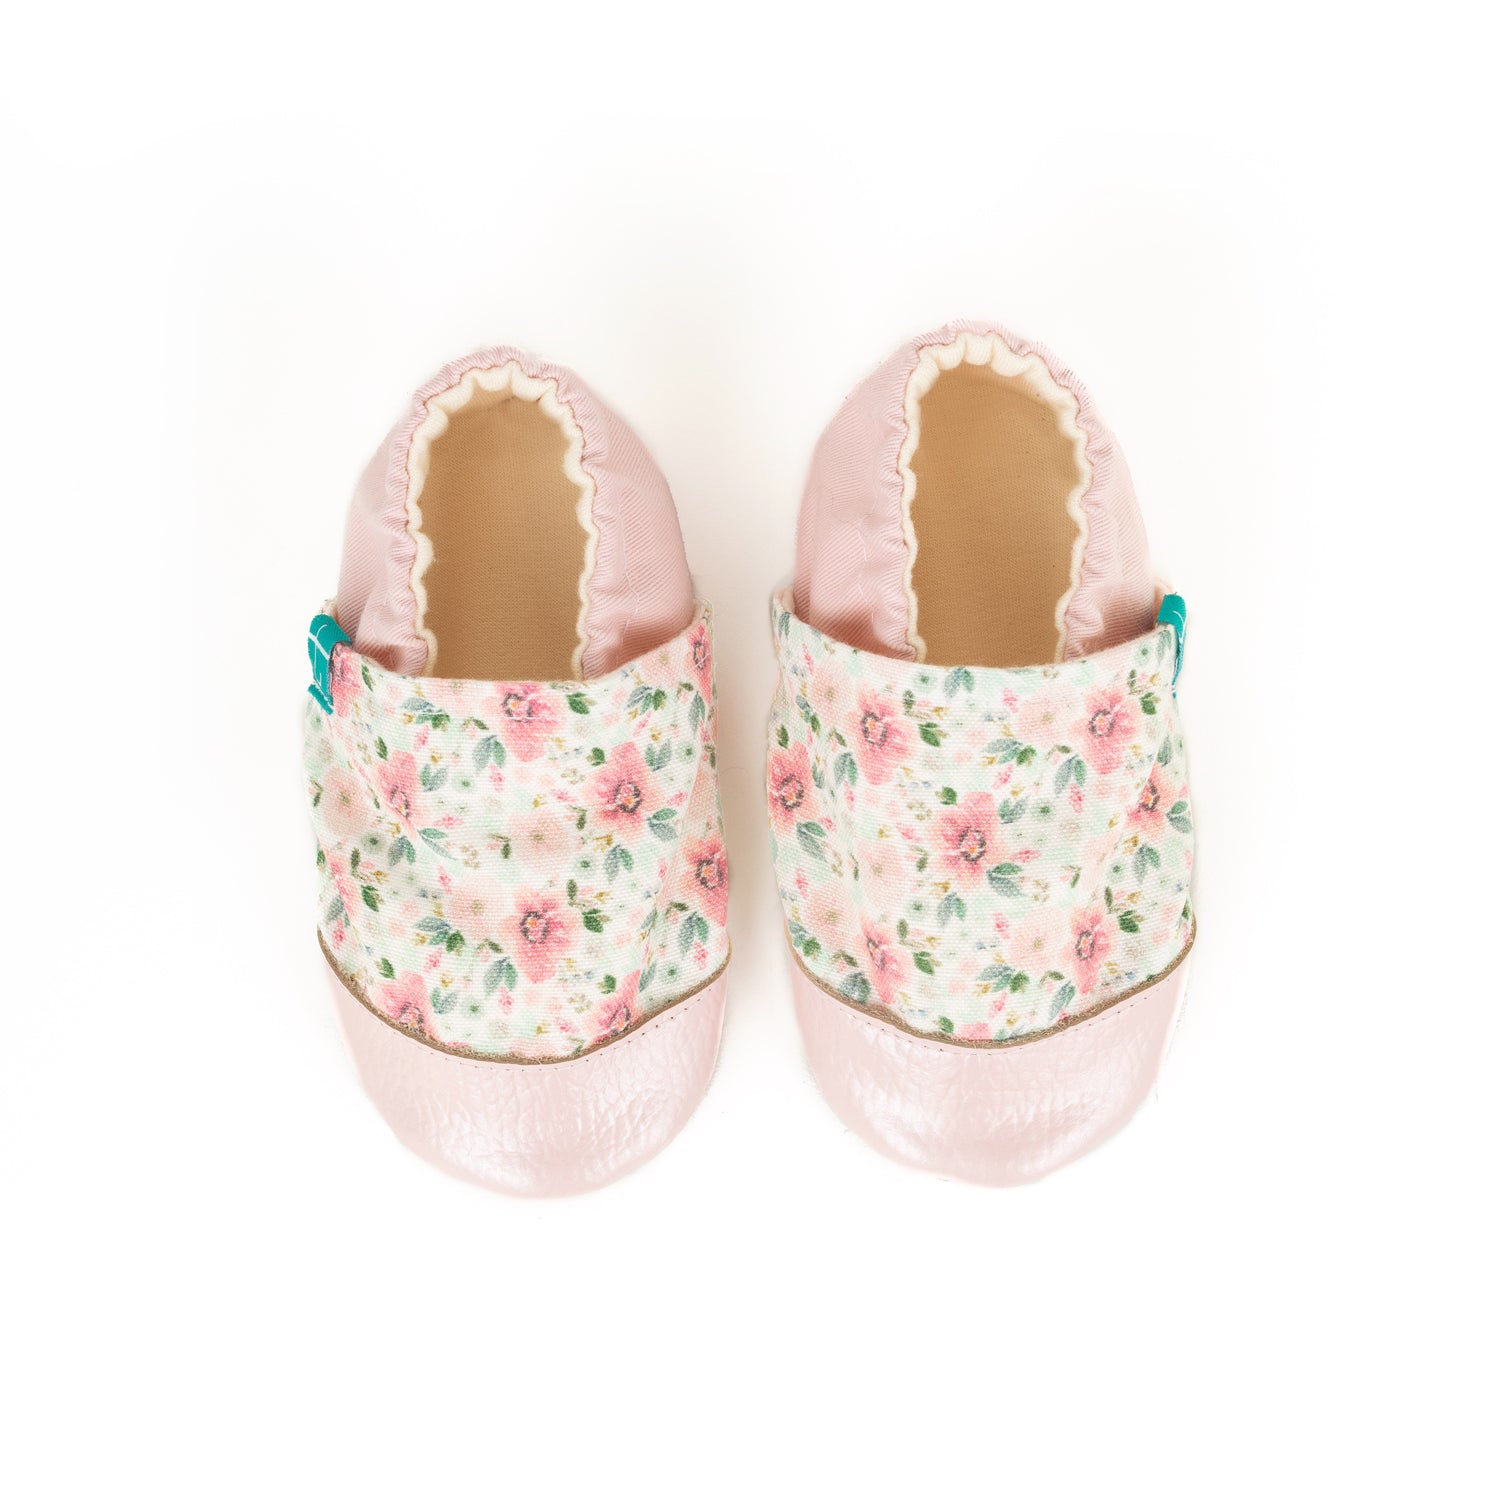 Aplle Blossom Pink Child Slippers